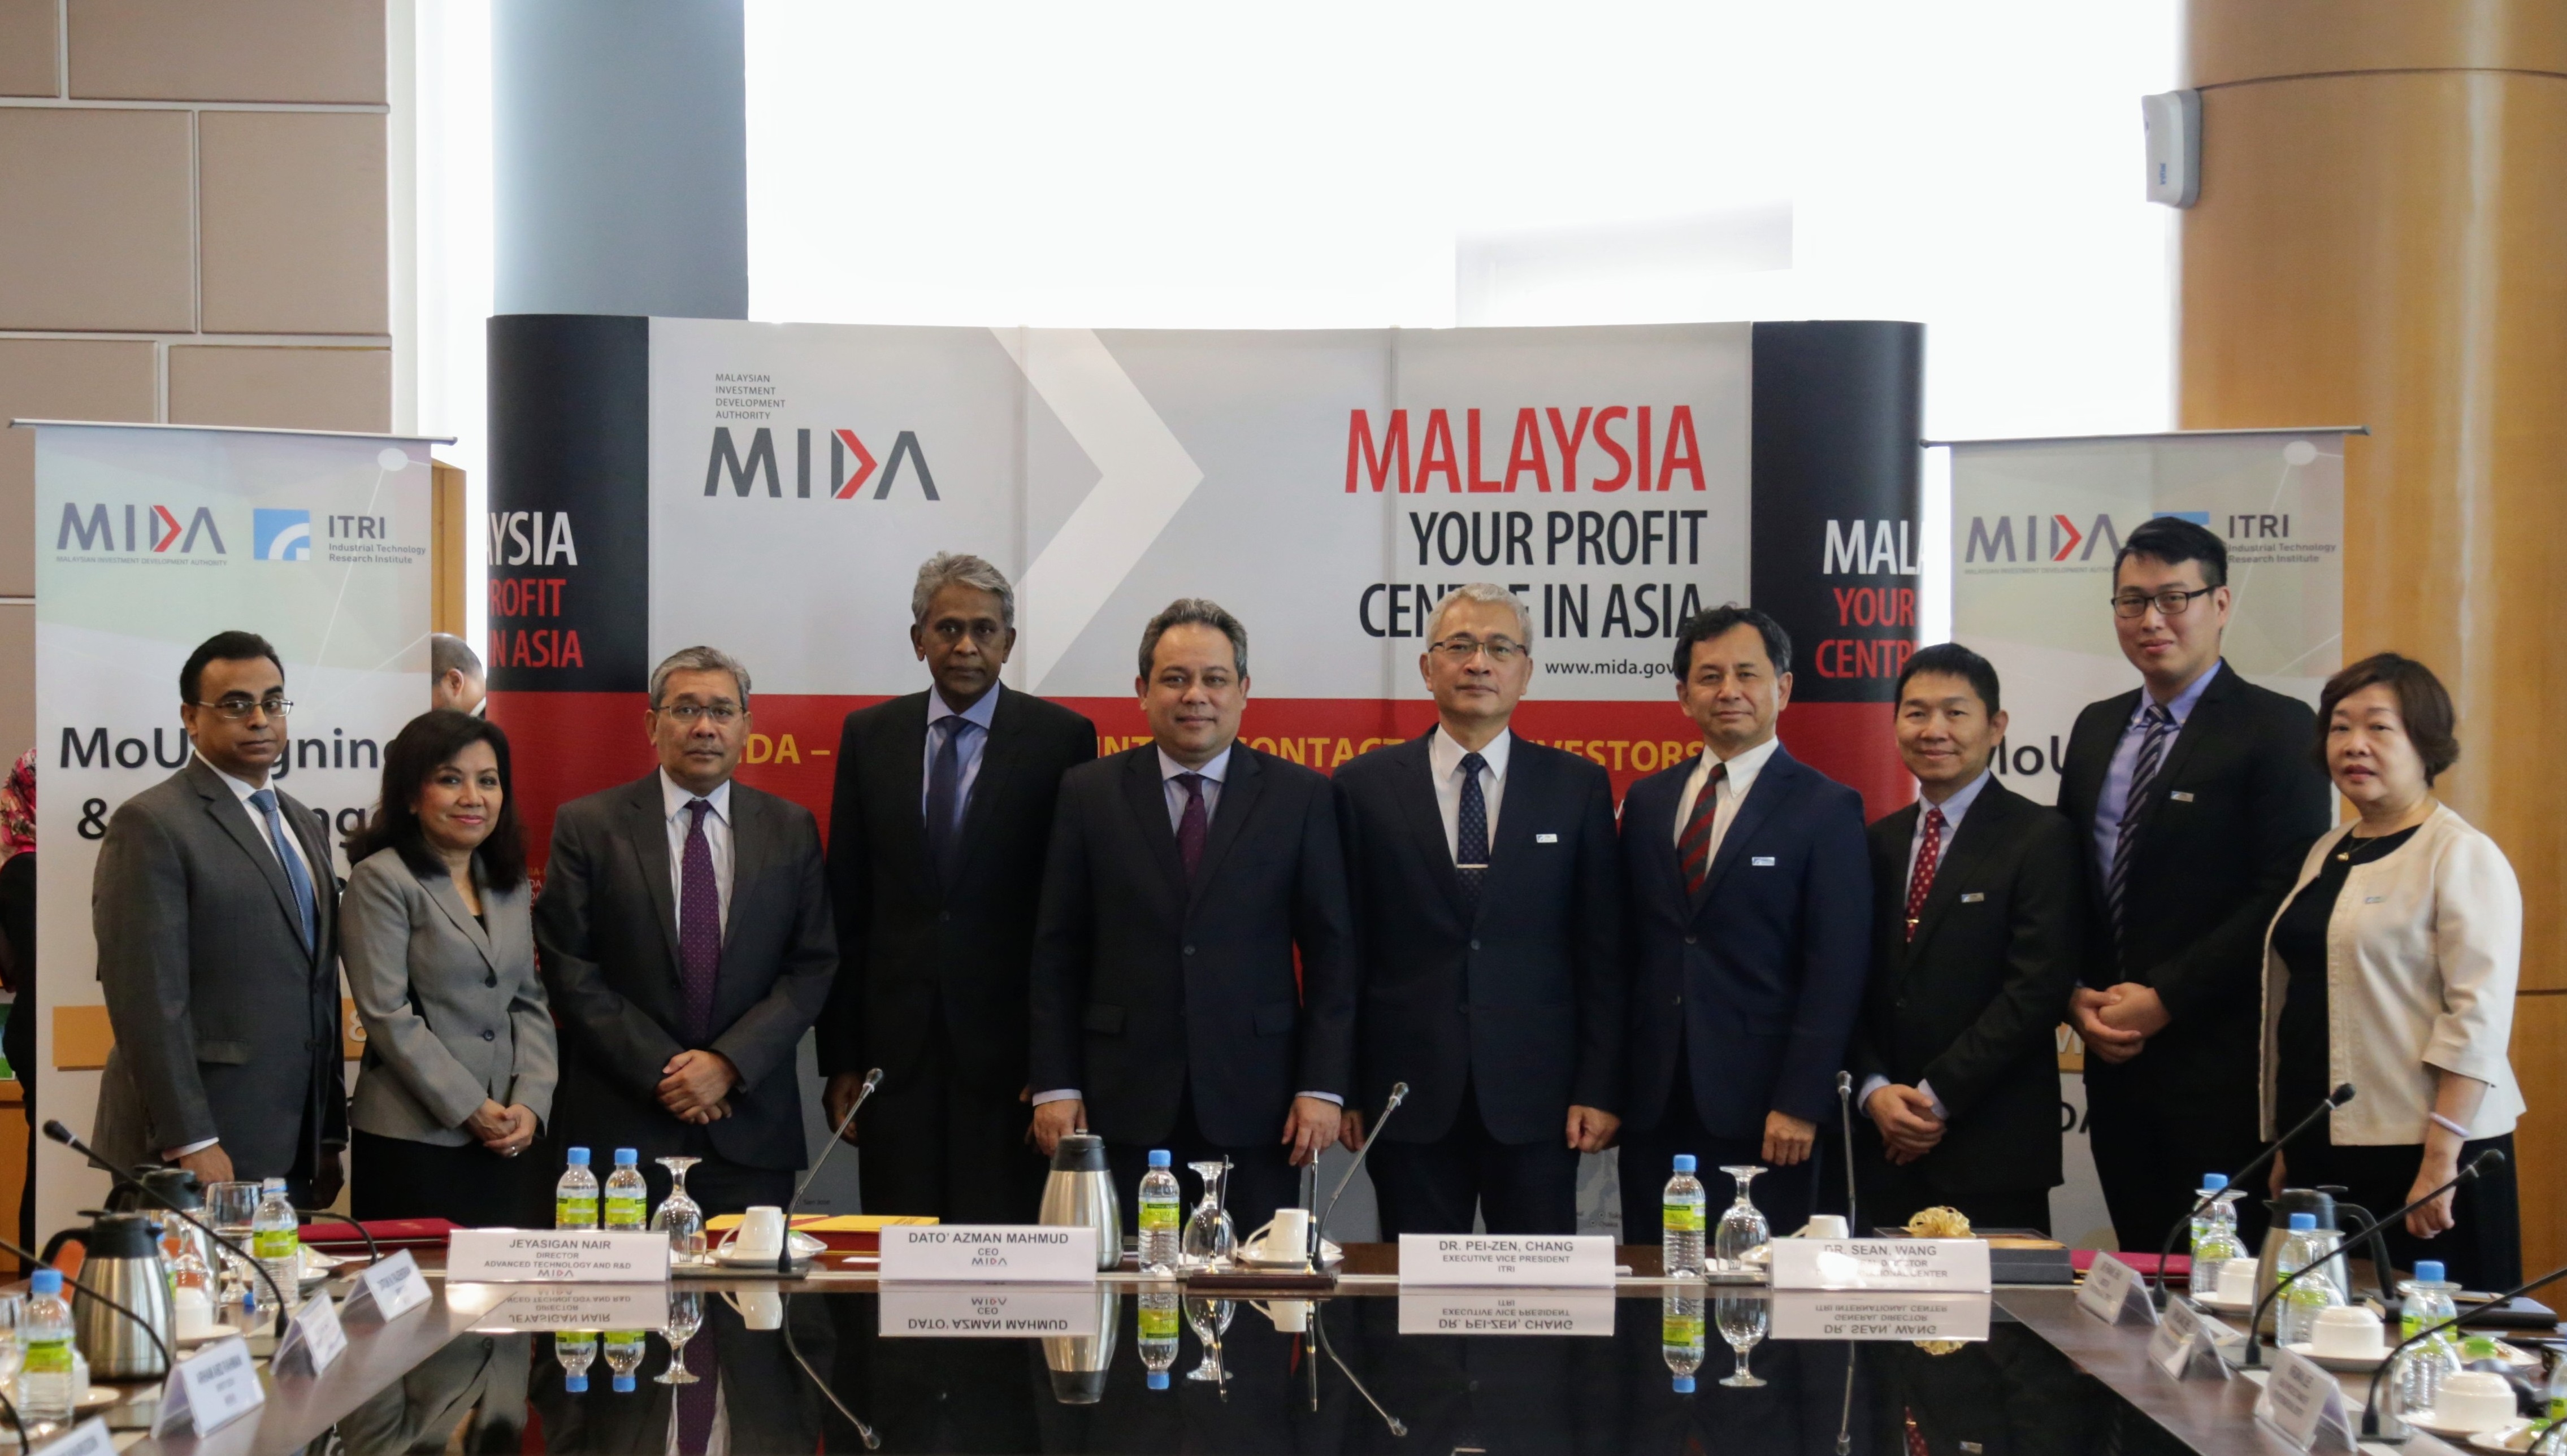 ITRI and MIDA signed a memorandum of cooperation, aiming to accelerate cooperation in smart manufacturing, IoT, and circular economy on May 7th.